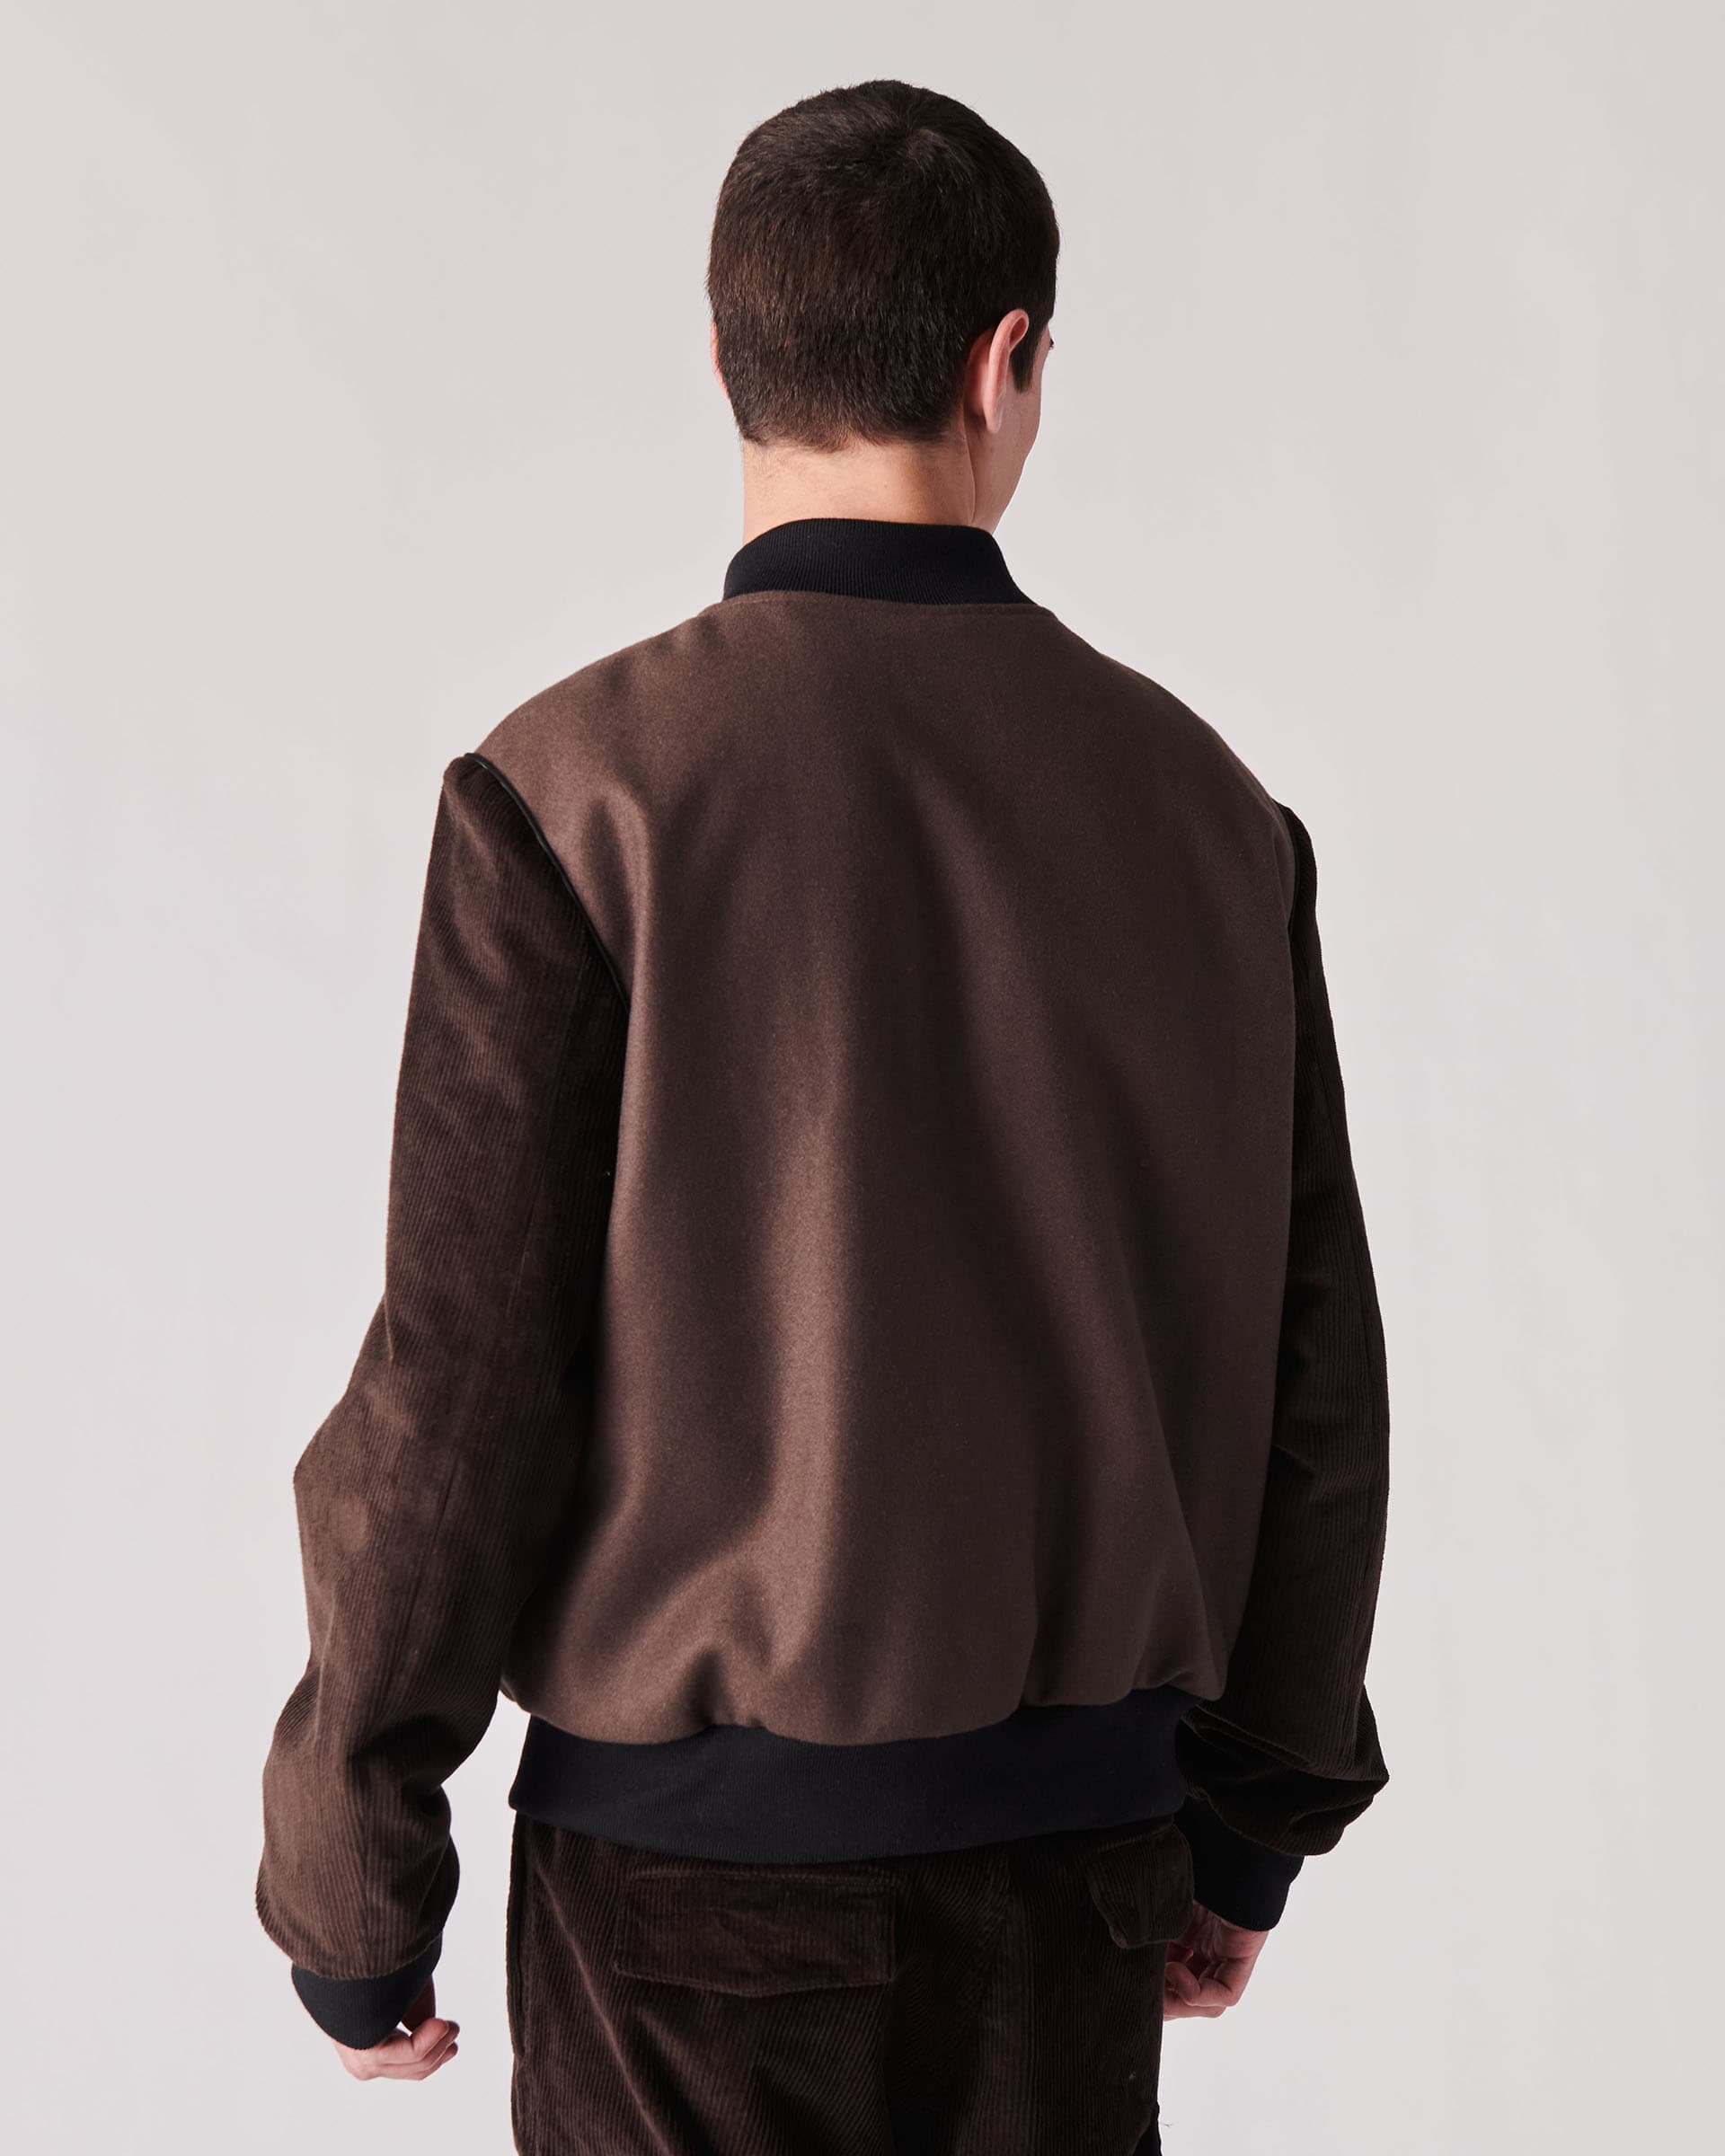 The Market Store | Cloth Bomber Jacket With Velvet Sleeves